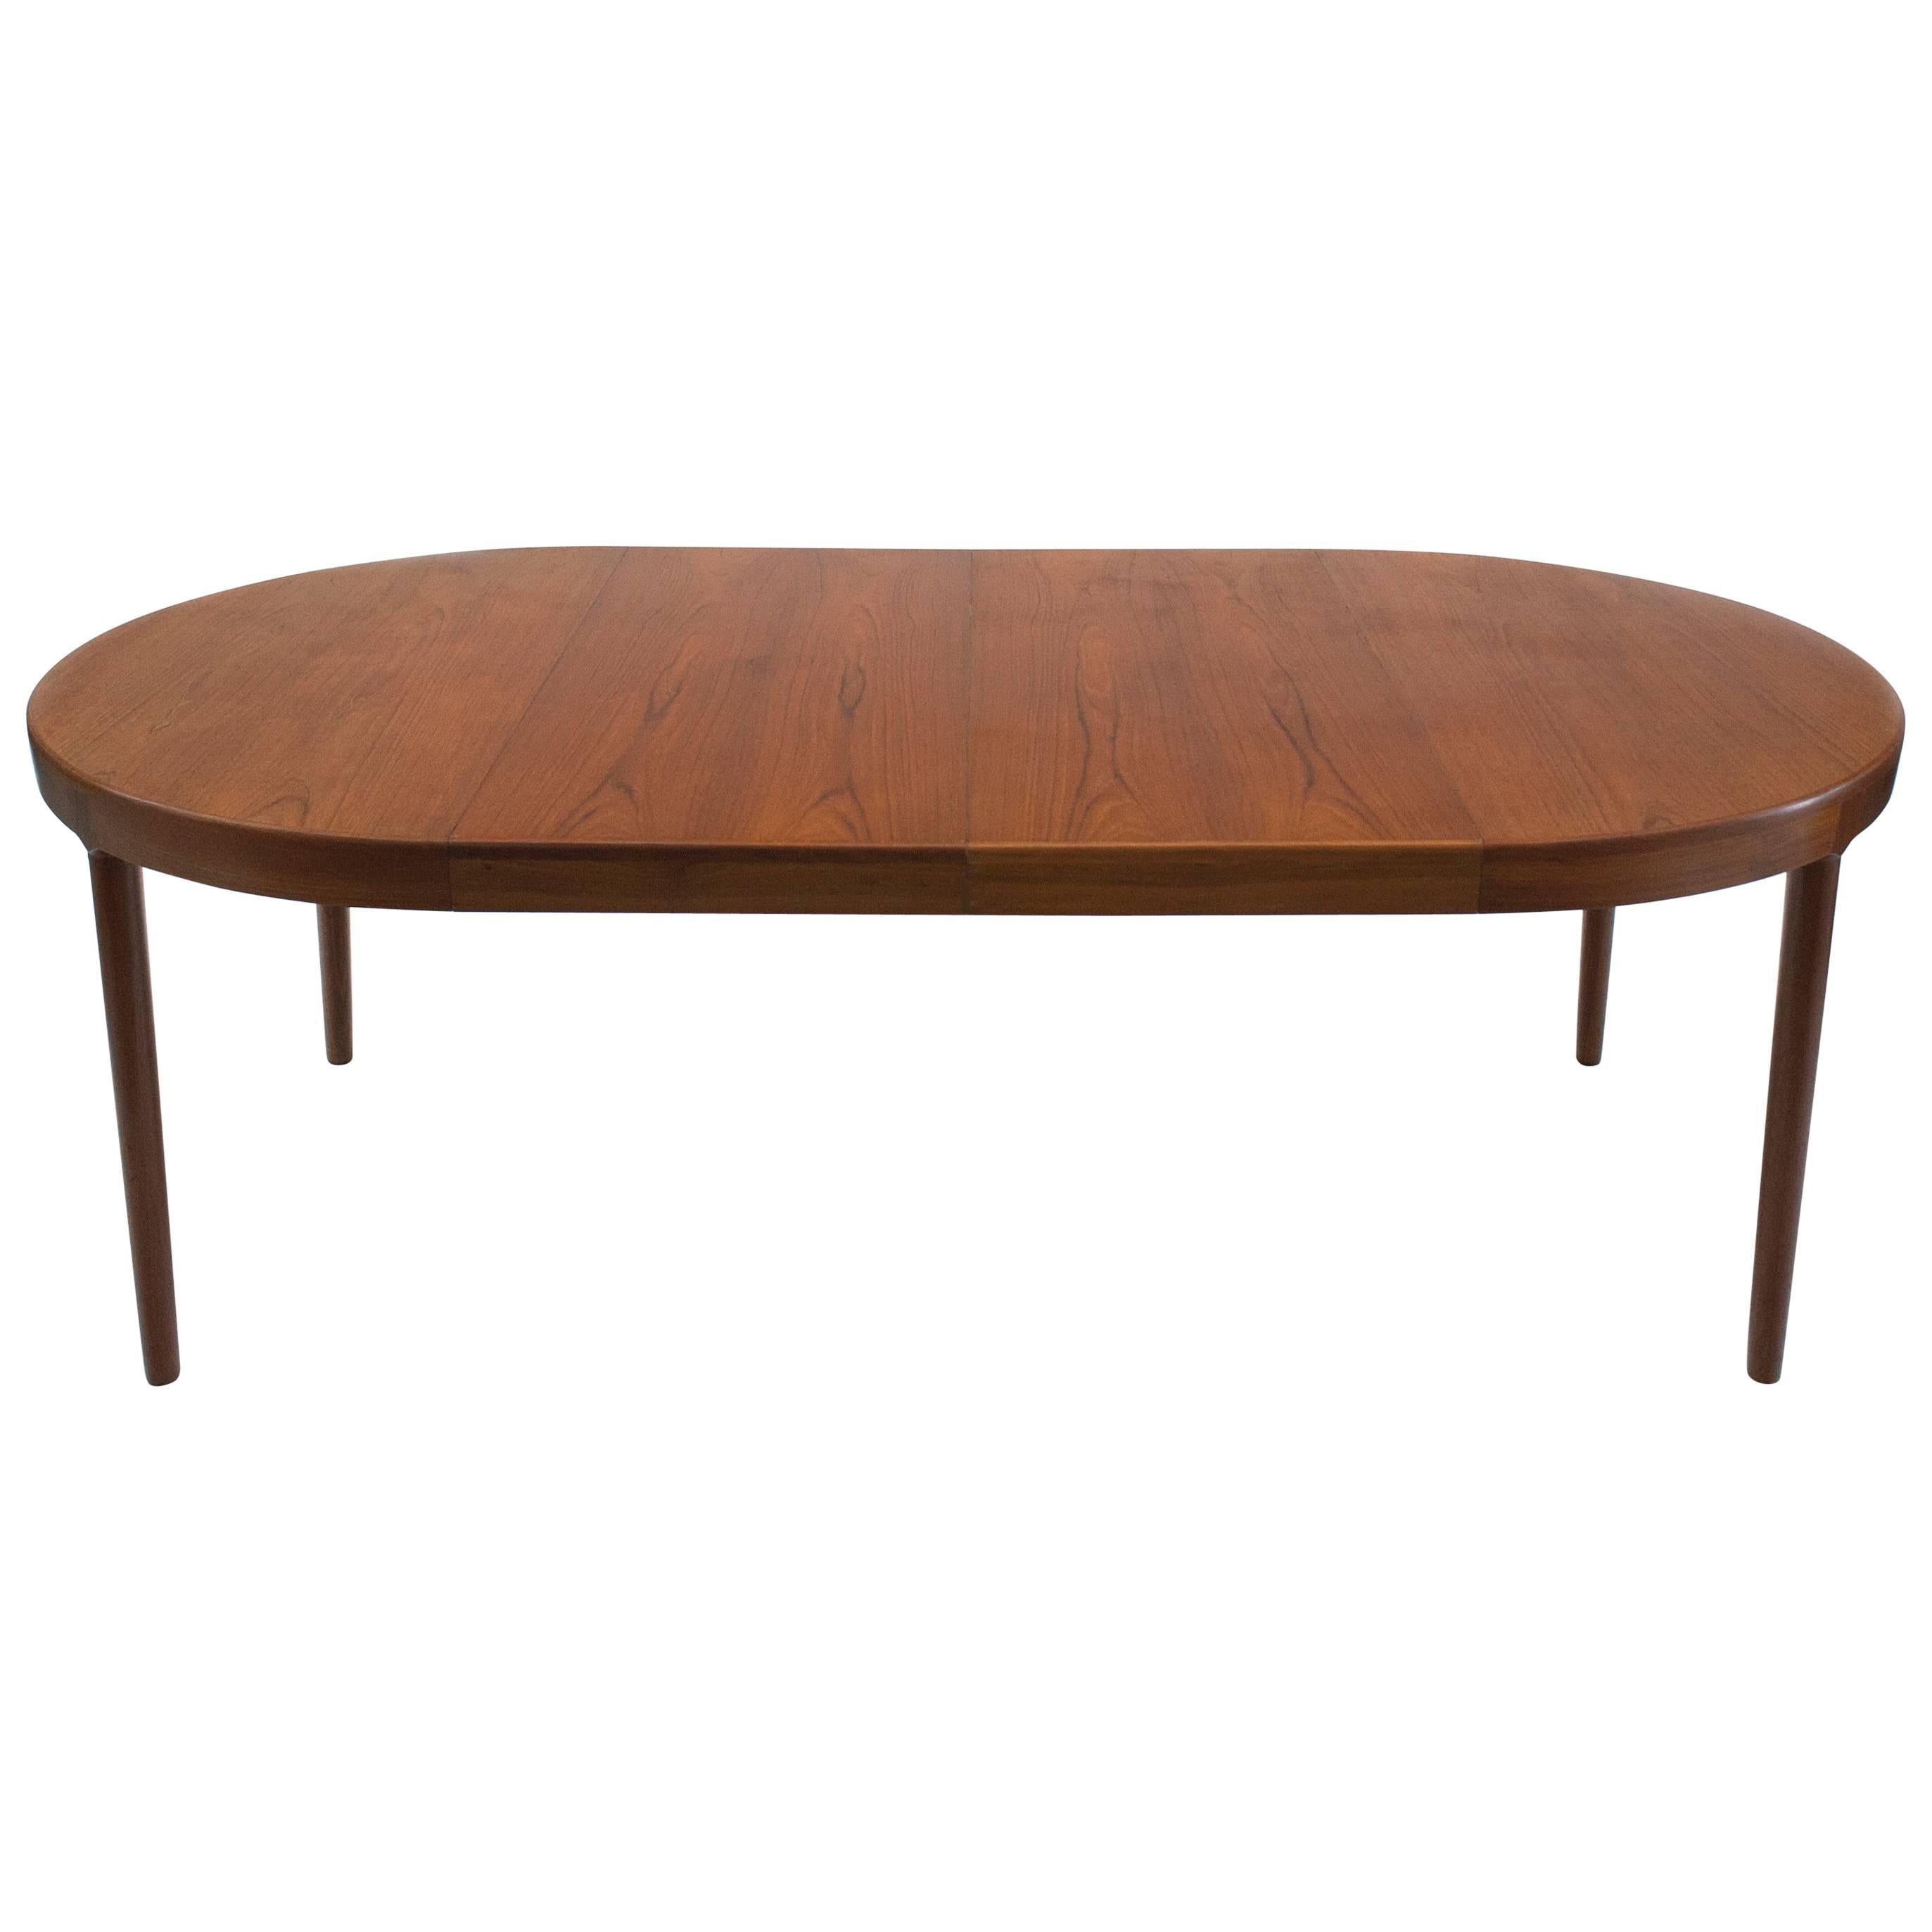 Round Extendable Danish Dining Table by Harry Ostergaard for Randers Møbelfabrik